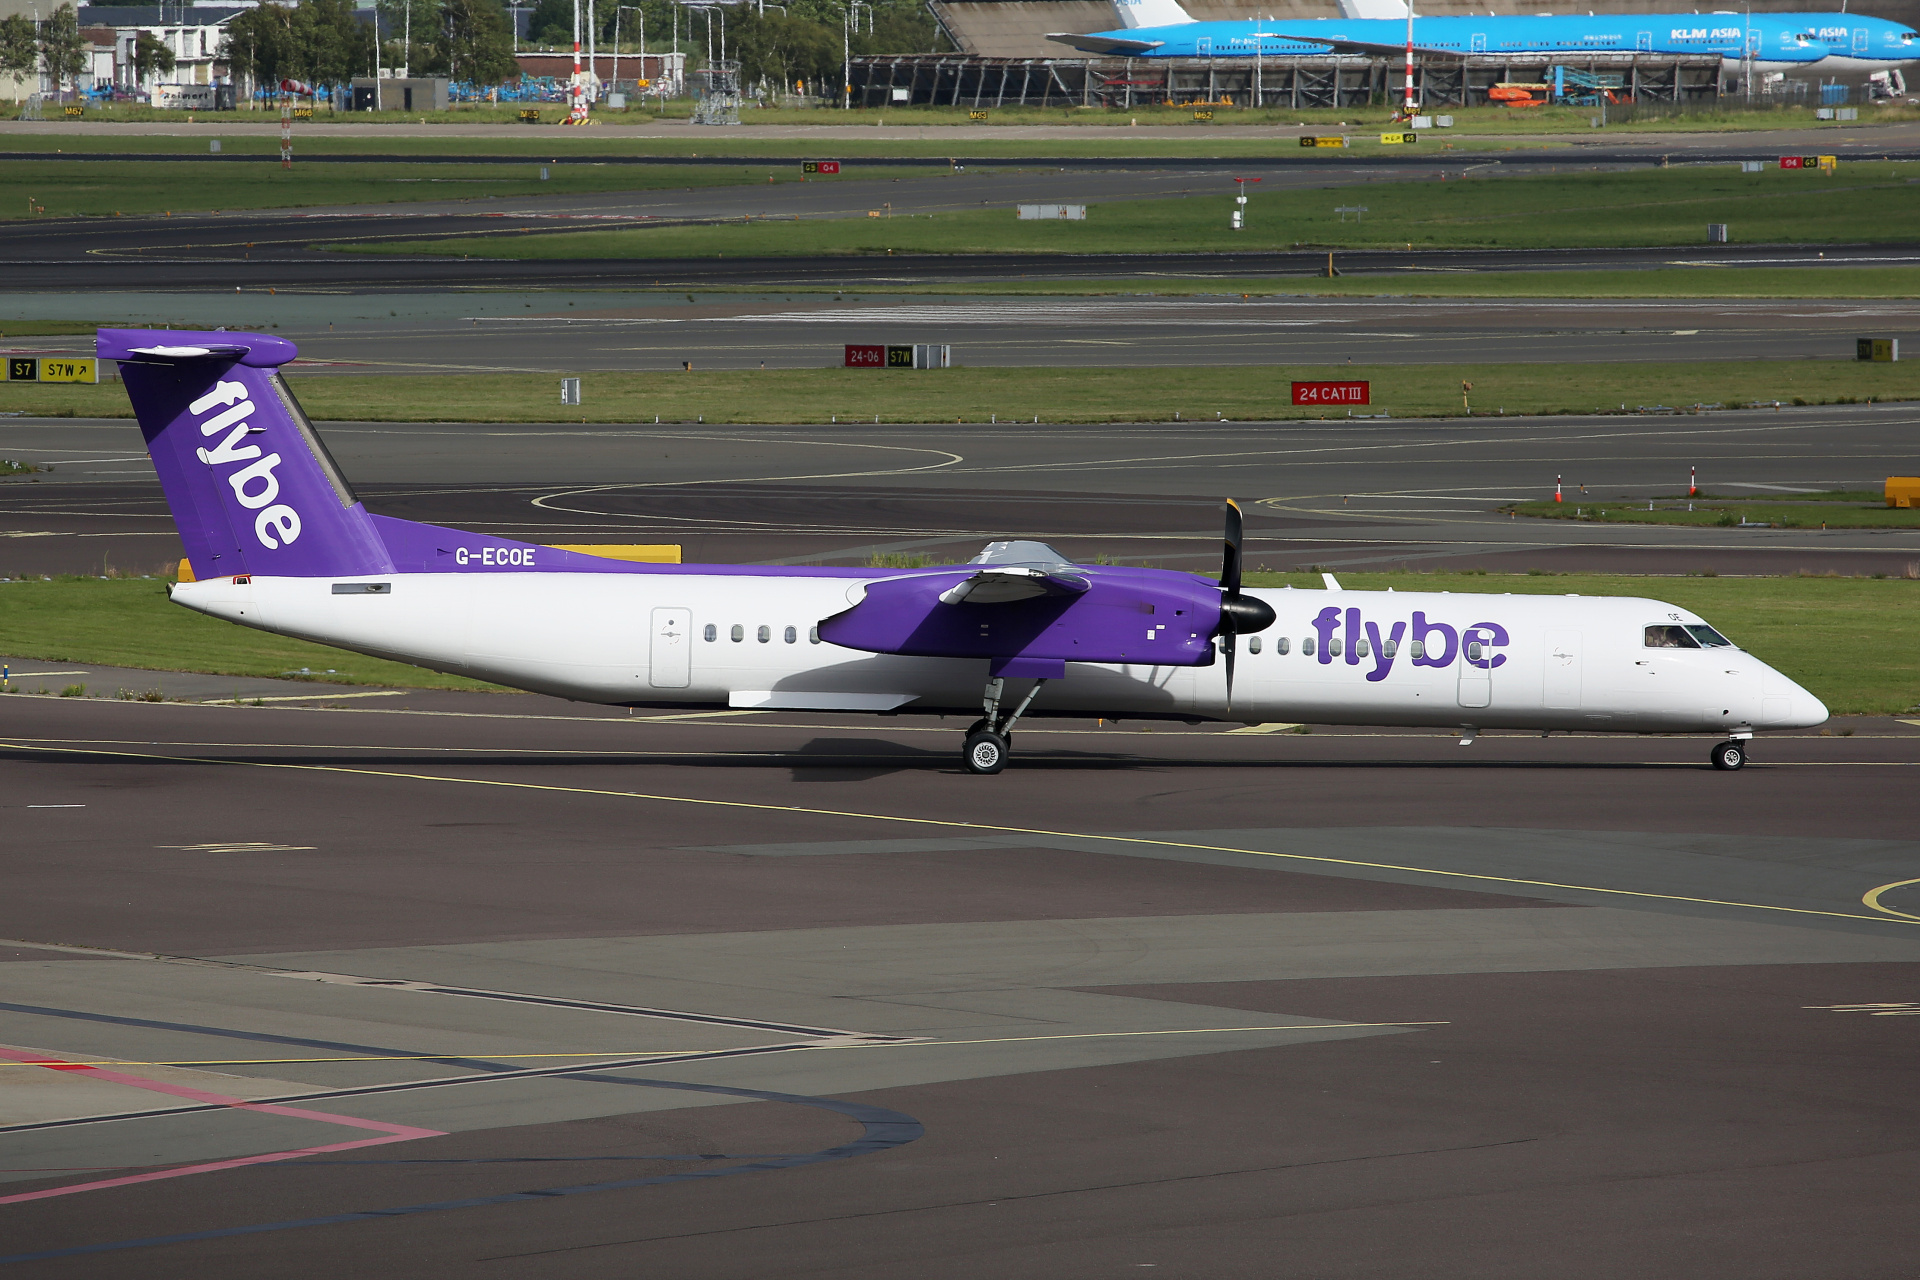 G-ECOE (Aircraft » Schiphol Spotting » Bombardier Q400 Dash 8 » FlyBe)